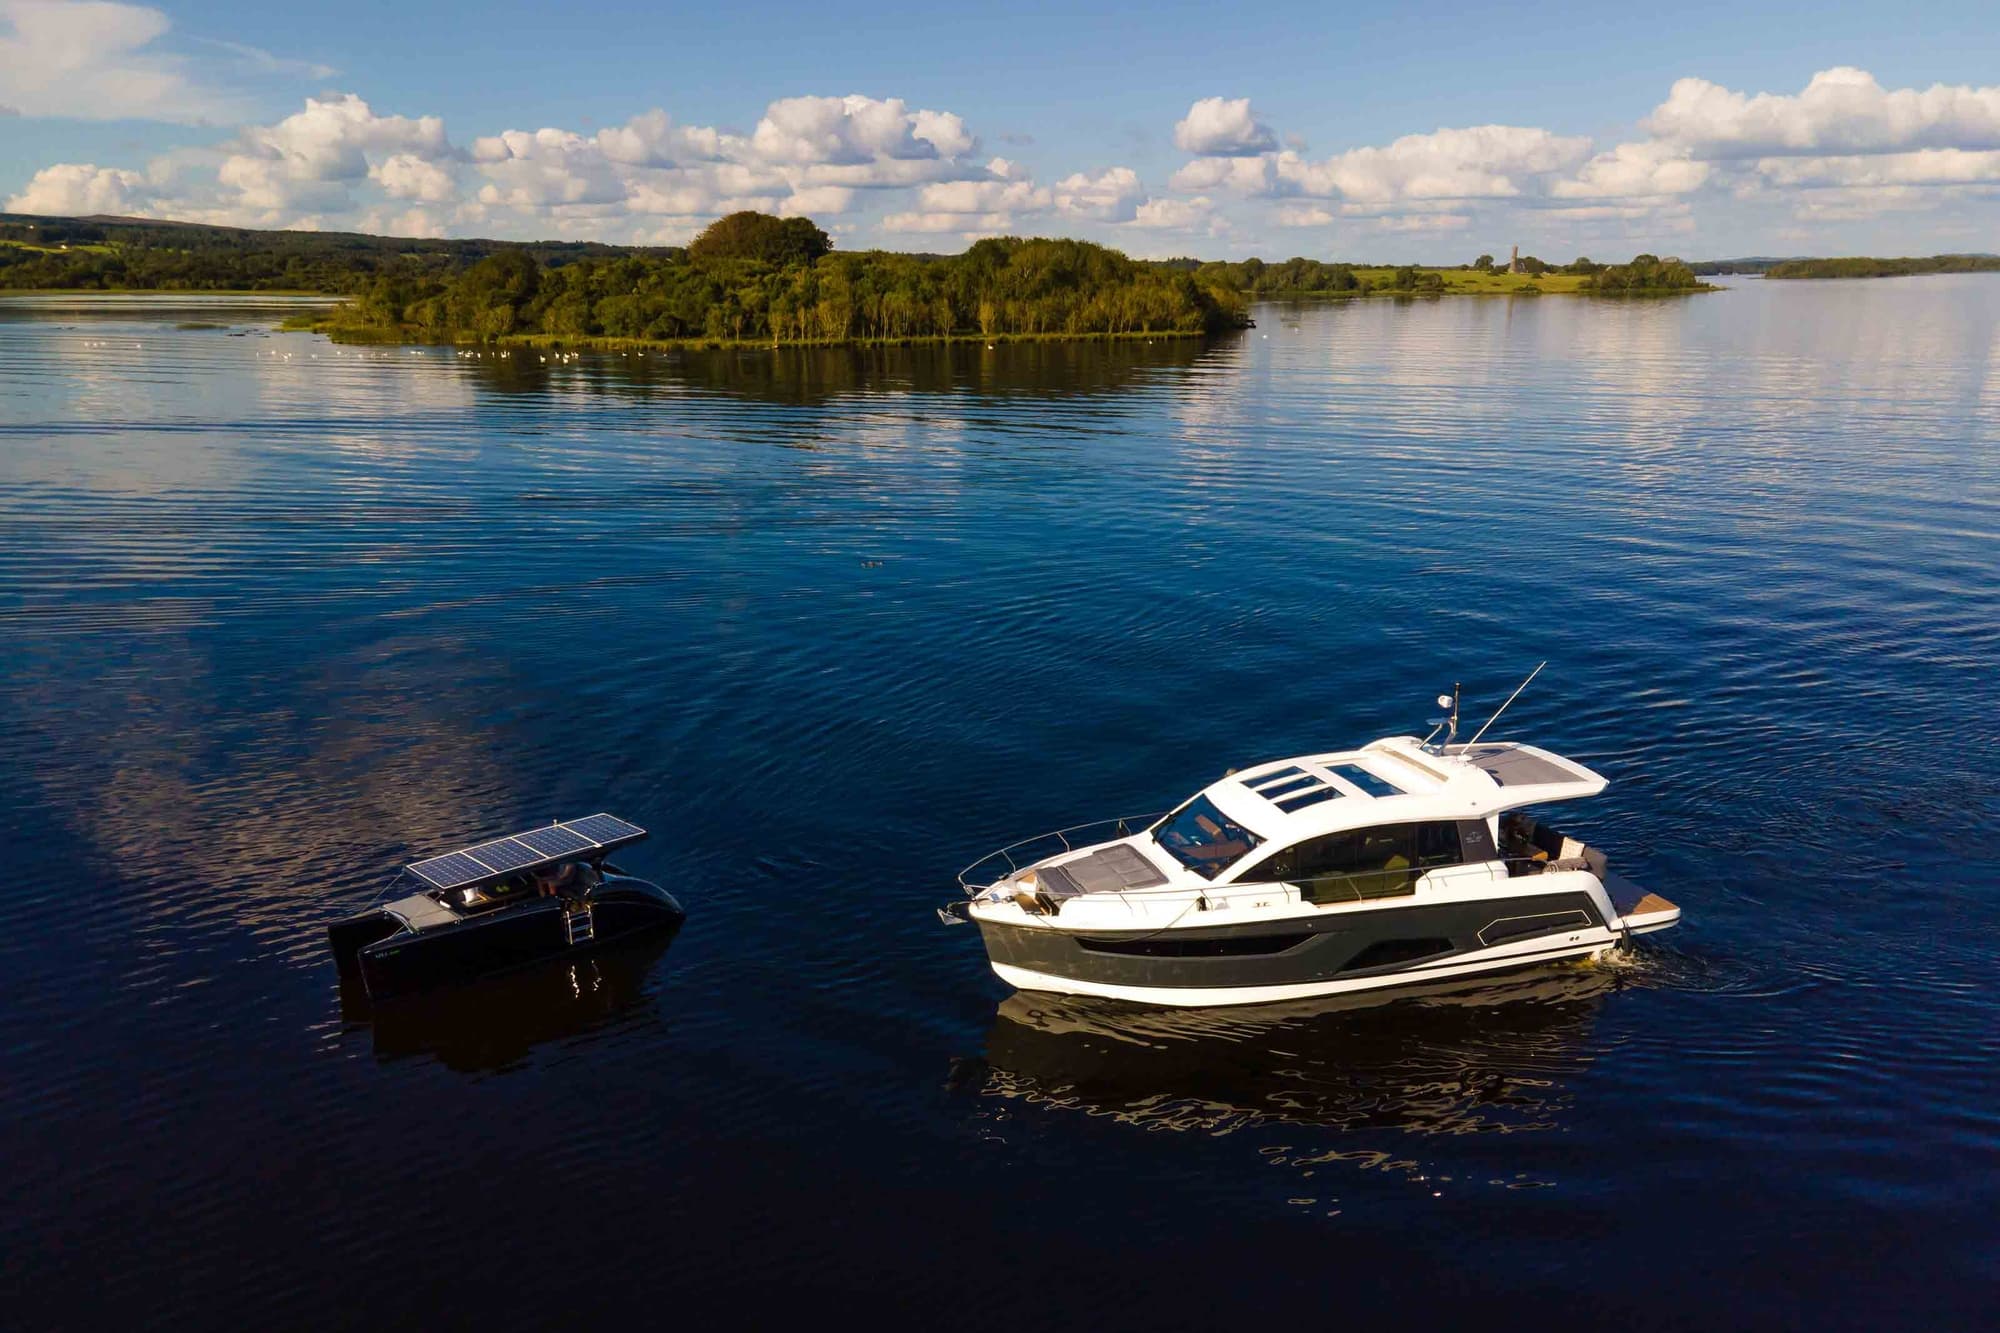 Charter a private yacht on an Irish loch